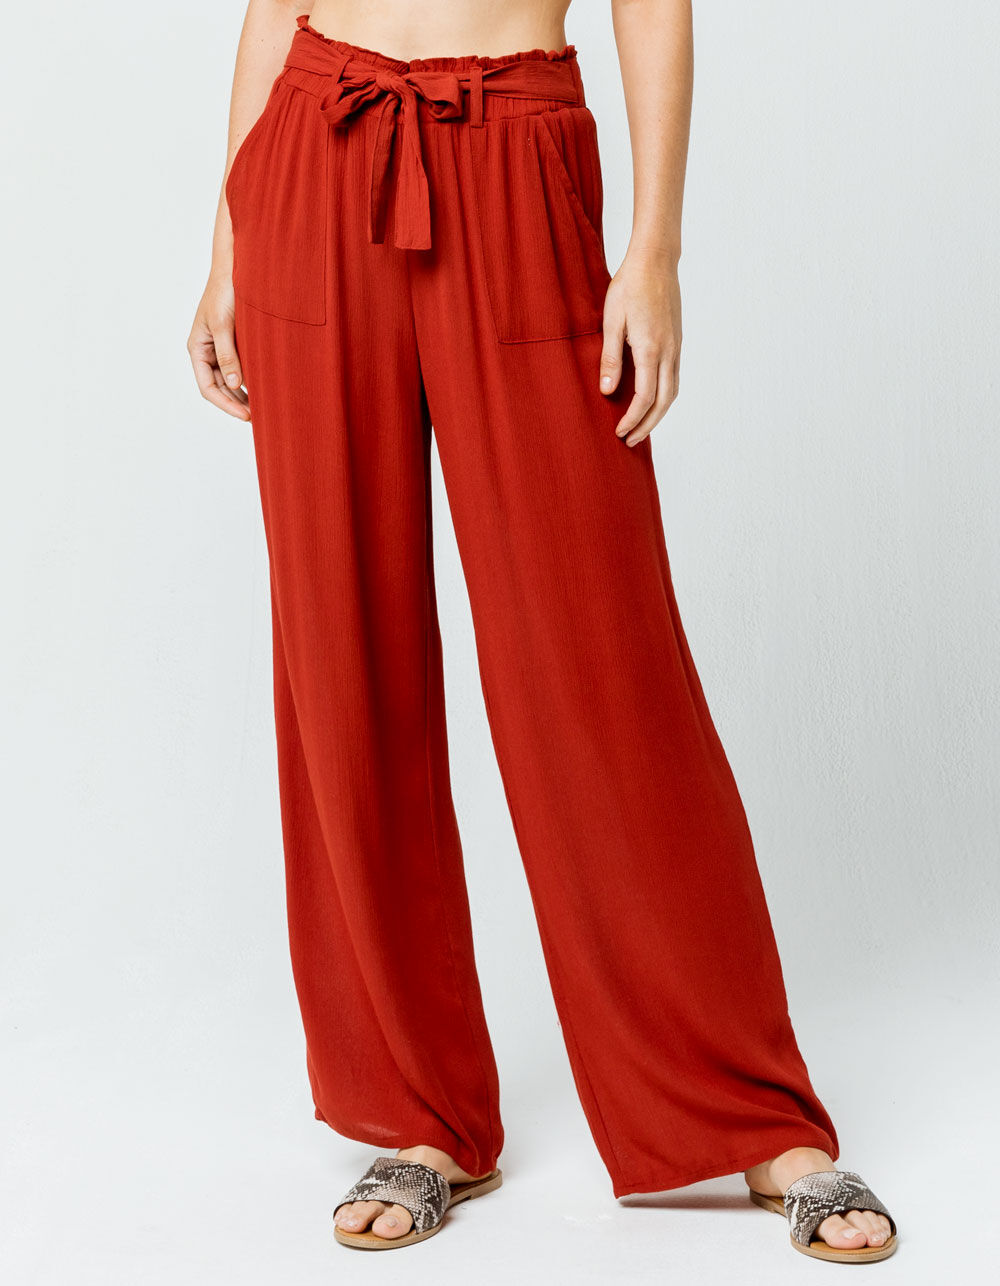 SKY AND SPARROW Solid Rust Womens Wide Leg Pants - RUST | Tillys